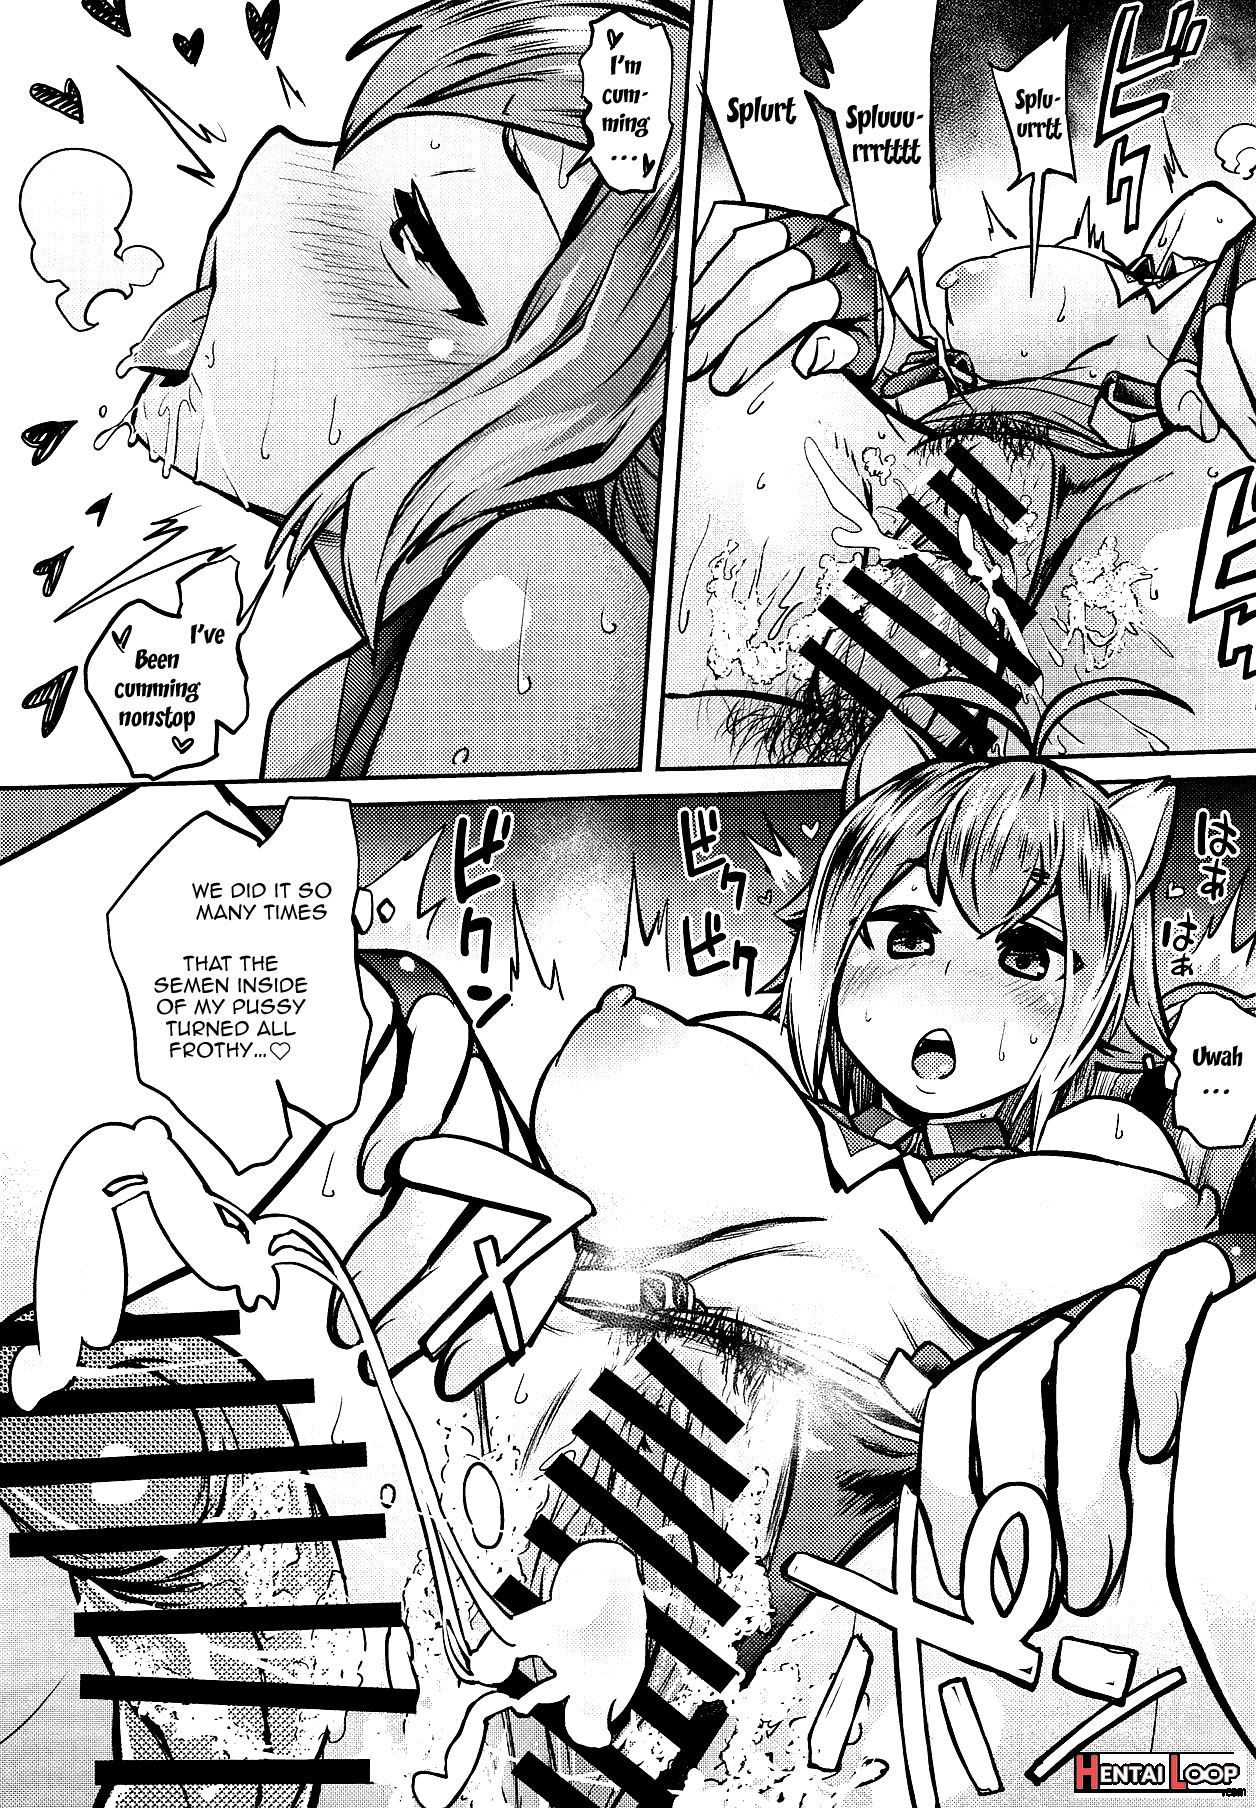 Together With Makoto page 24